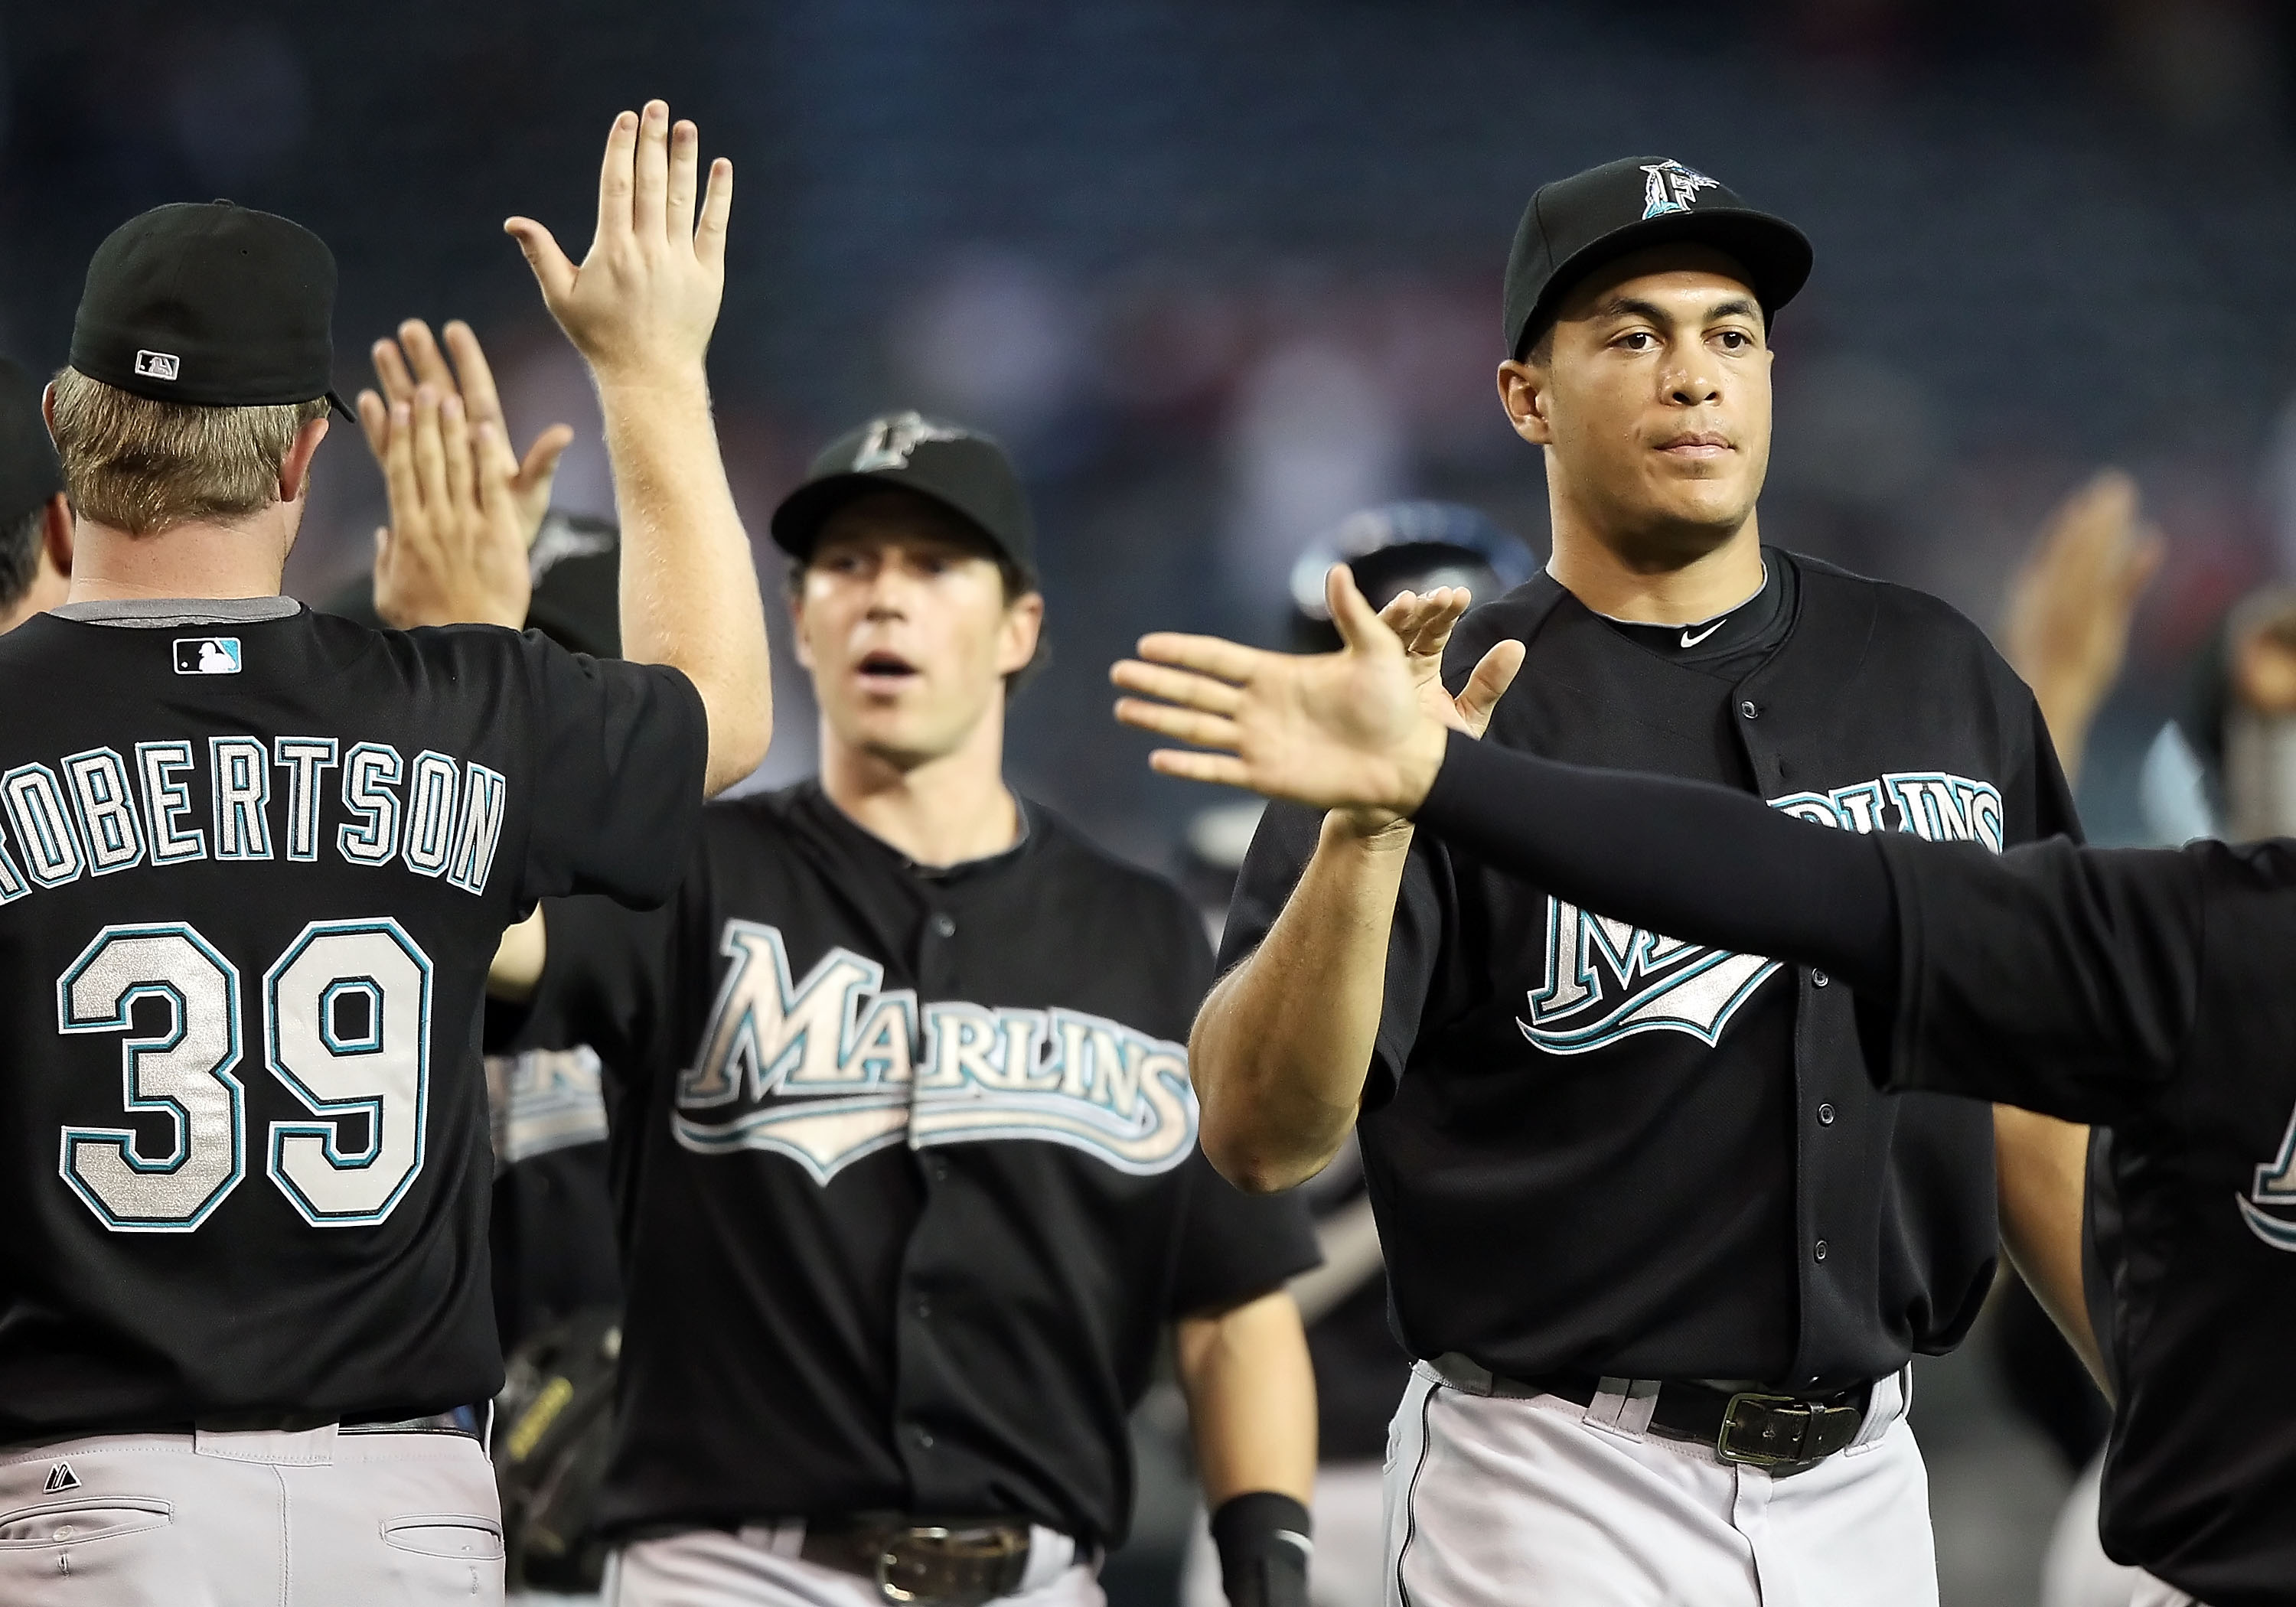 PHOENIX - JULY 11:  Mike Stanton #27 of the Florida Marlins high fives teammates after defeating the Arizona Diamondbacks in the Major League Baseball game at Chase Field on July 11, 2010 in Phoenix, Arizona.  The Marlins defeated the Diamondbacks 2-0.  (